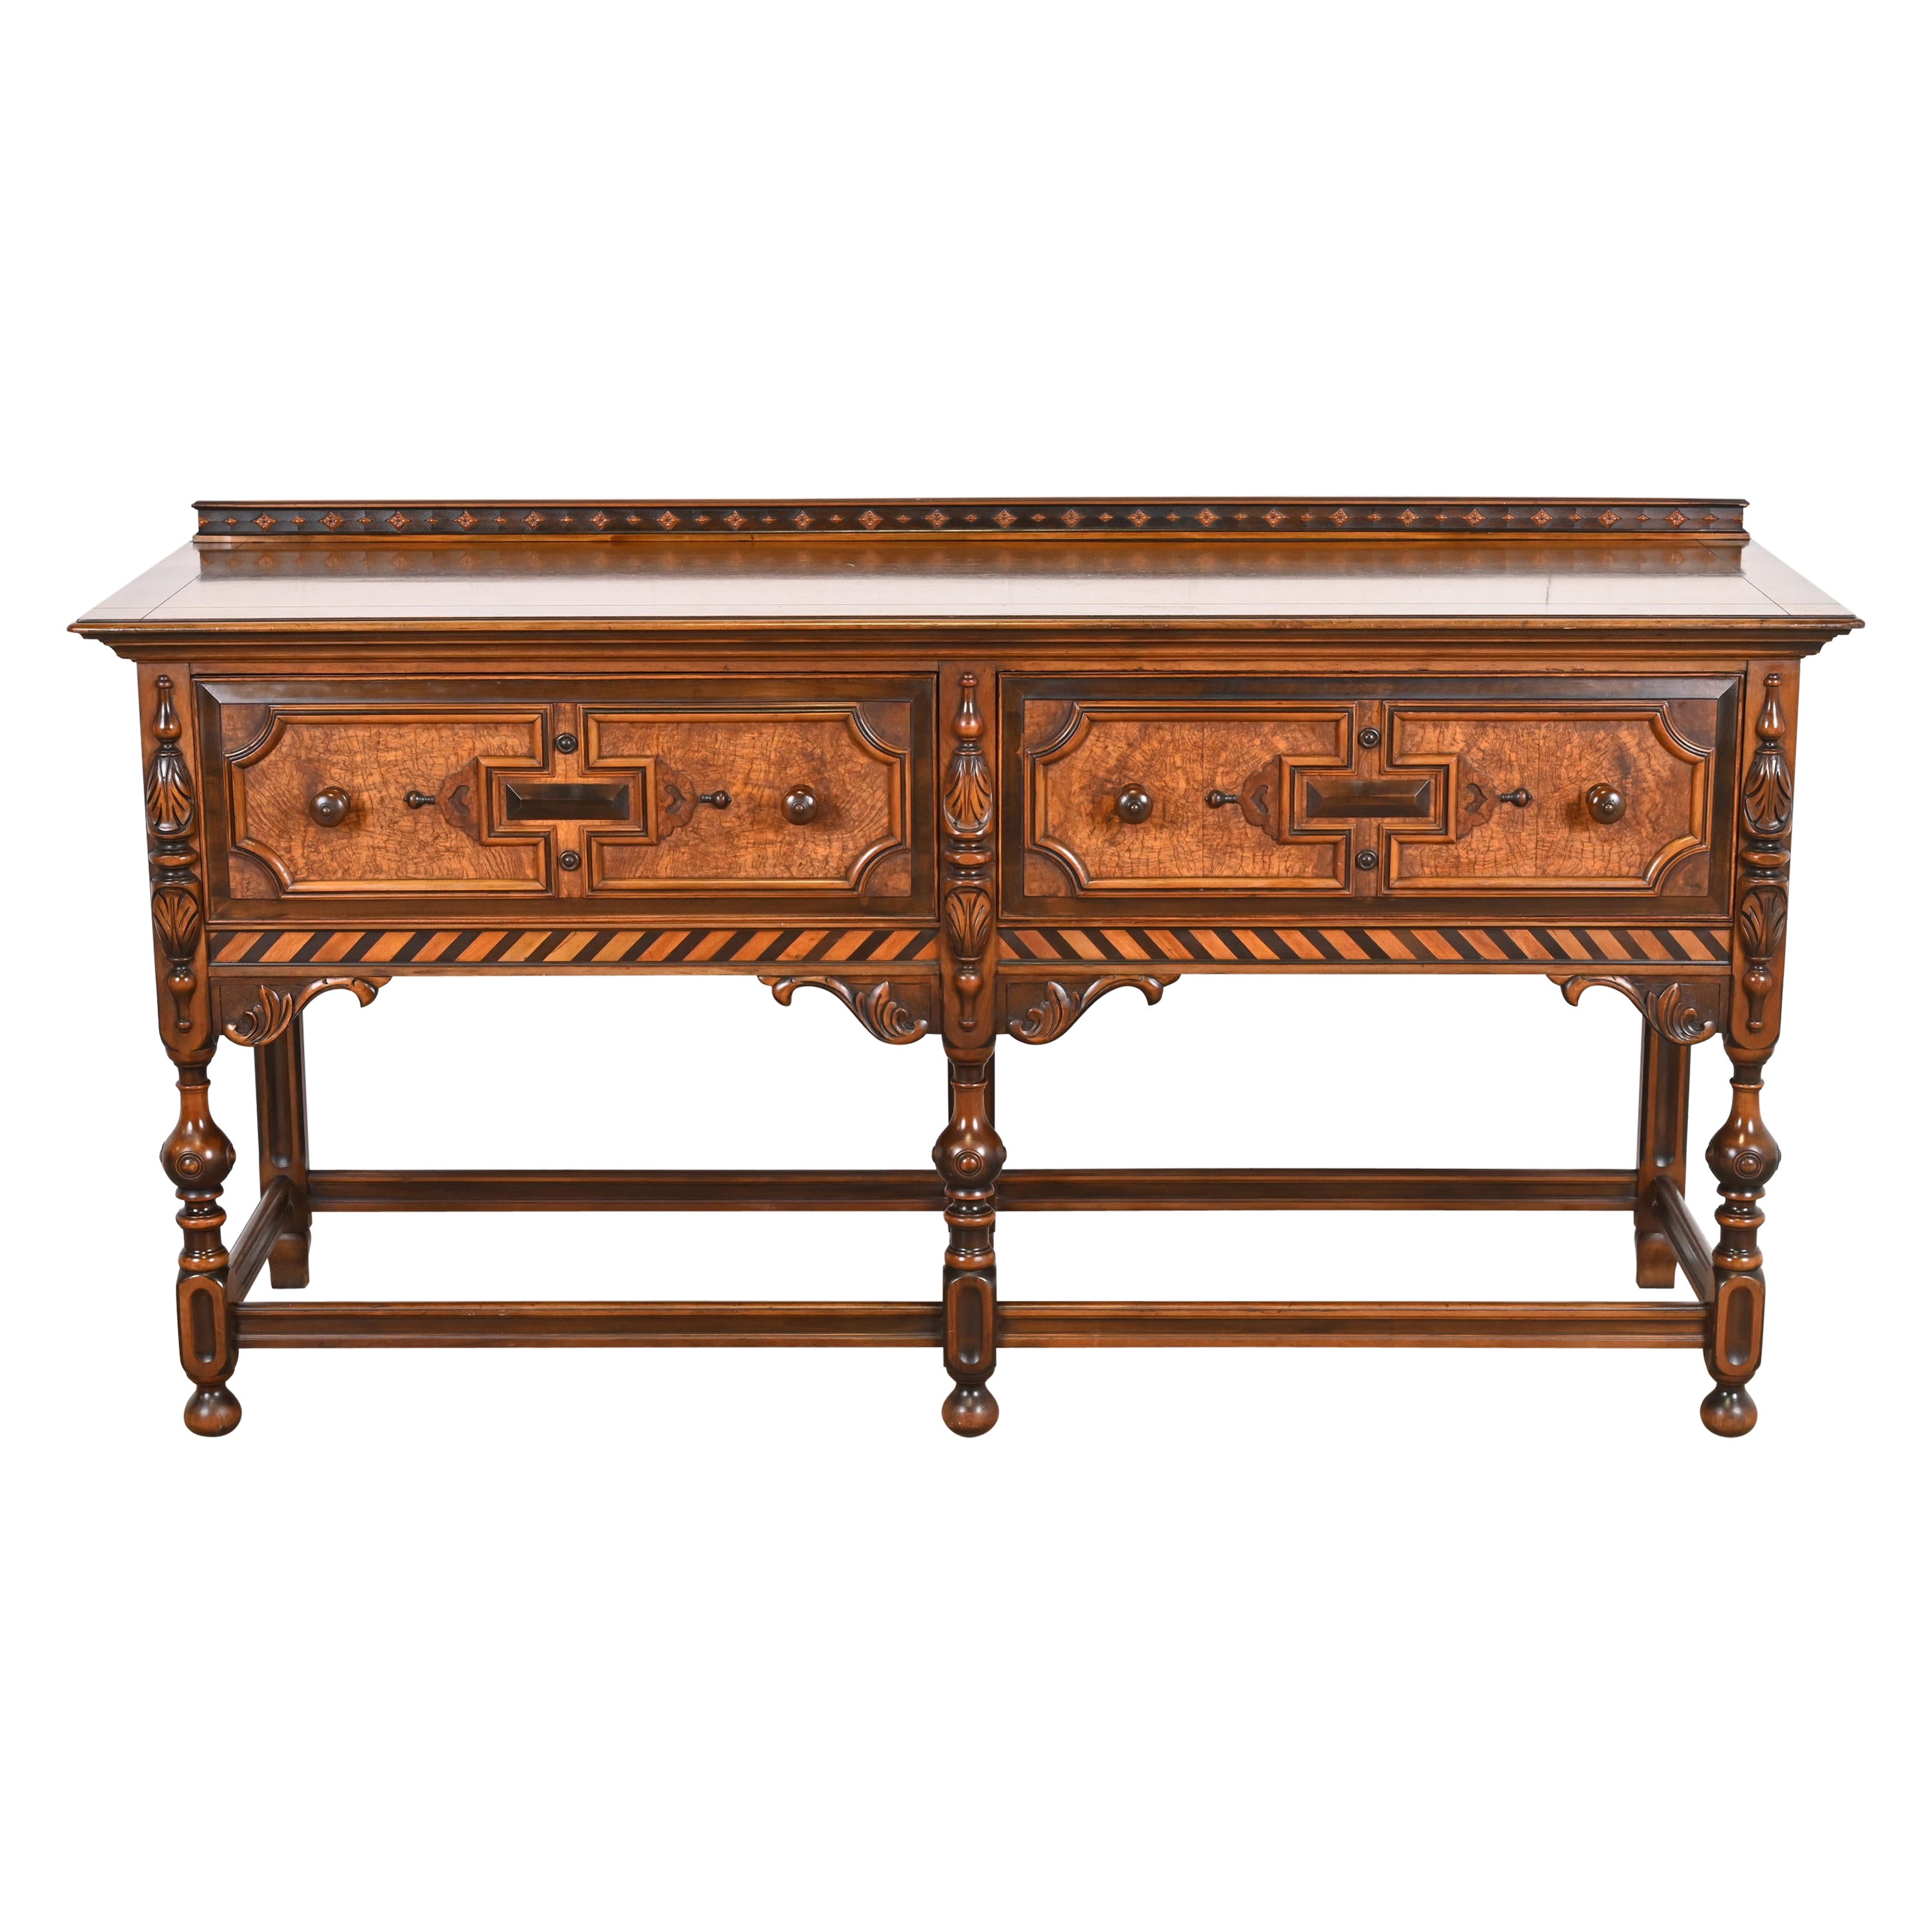 Antique Berkey & Gay English Jacobean Carved Walnut and Burl Wood Sideboard For Sale